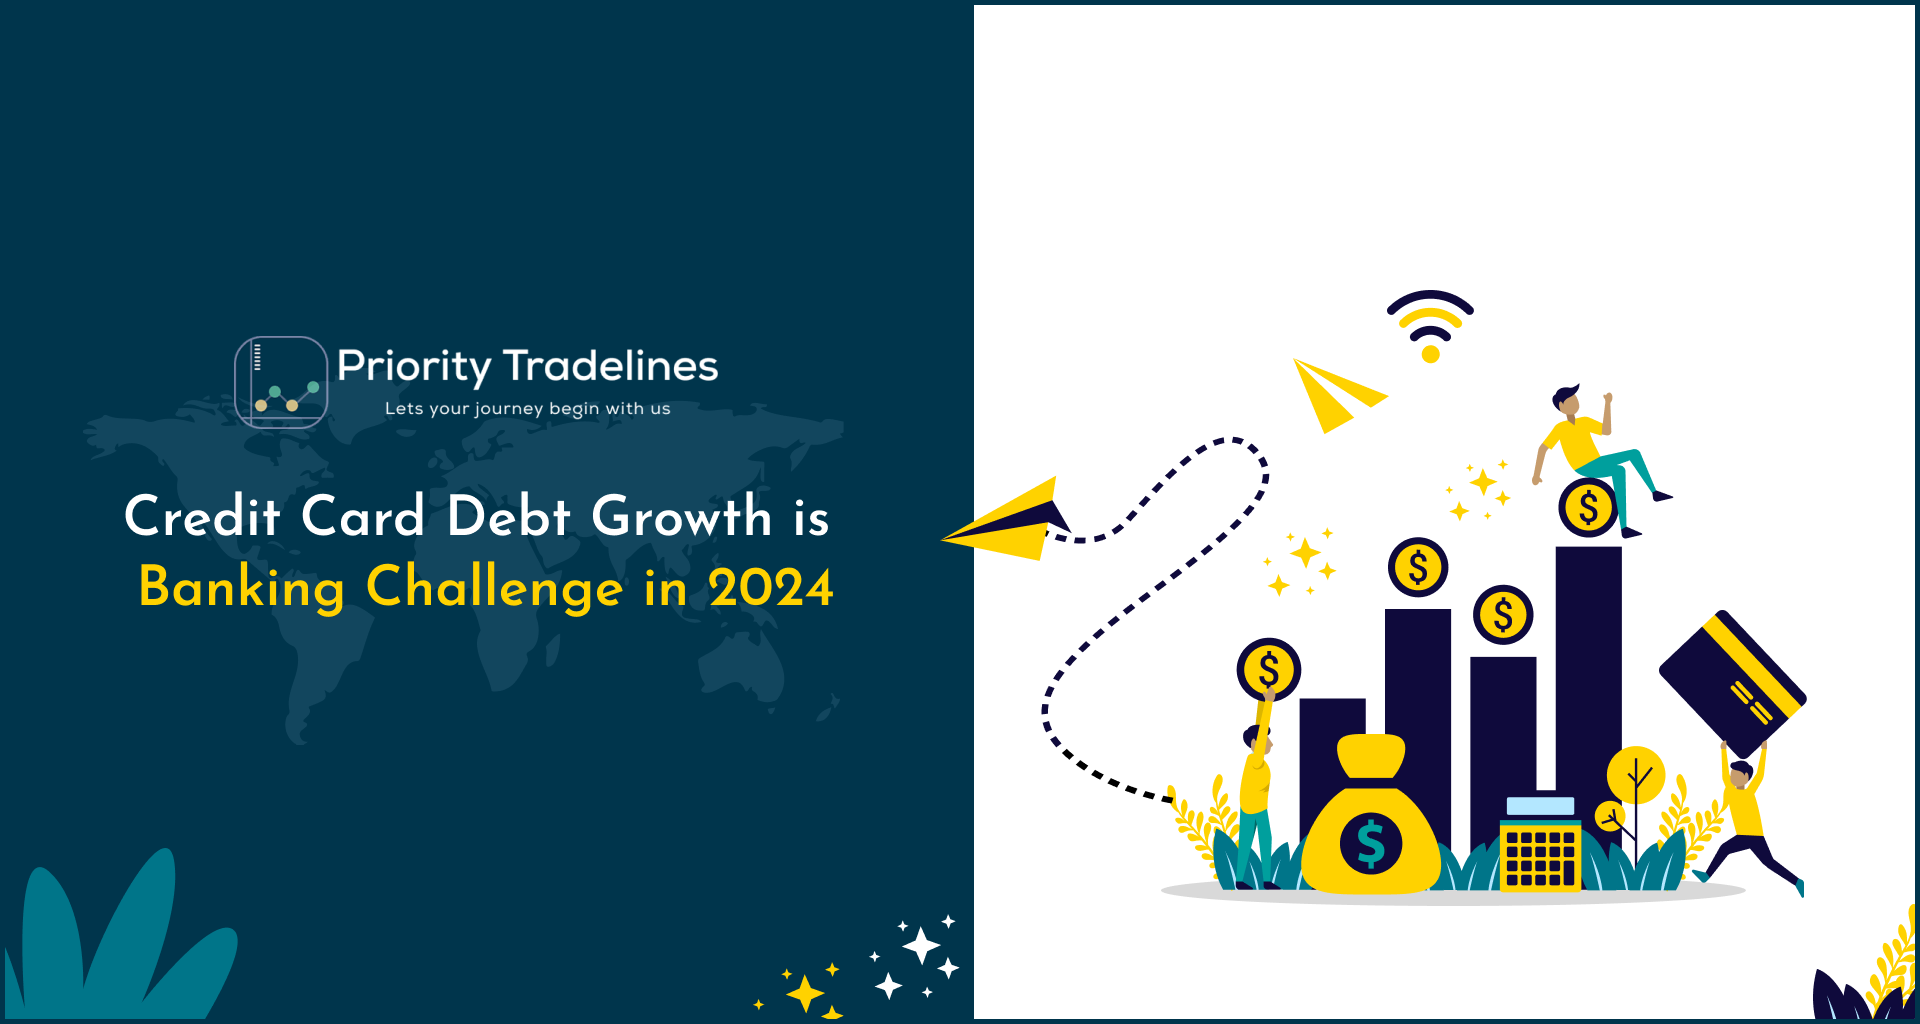 Credit Card Debt Growth is Banking Challenge in 2024